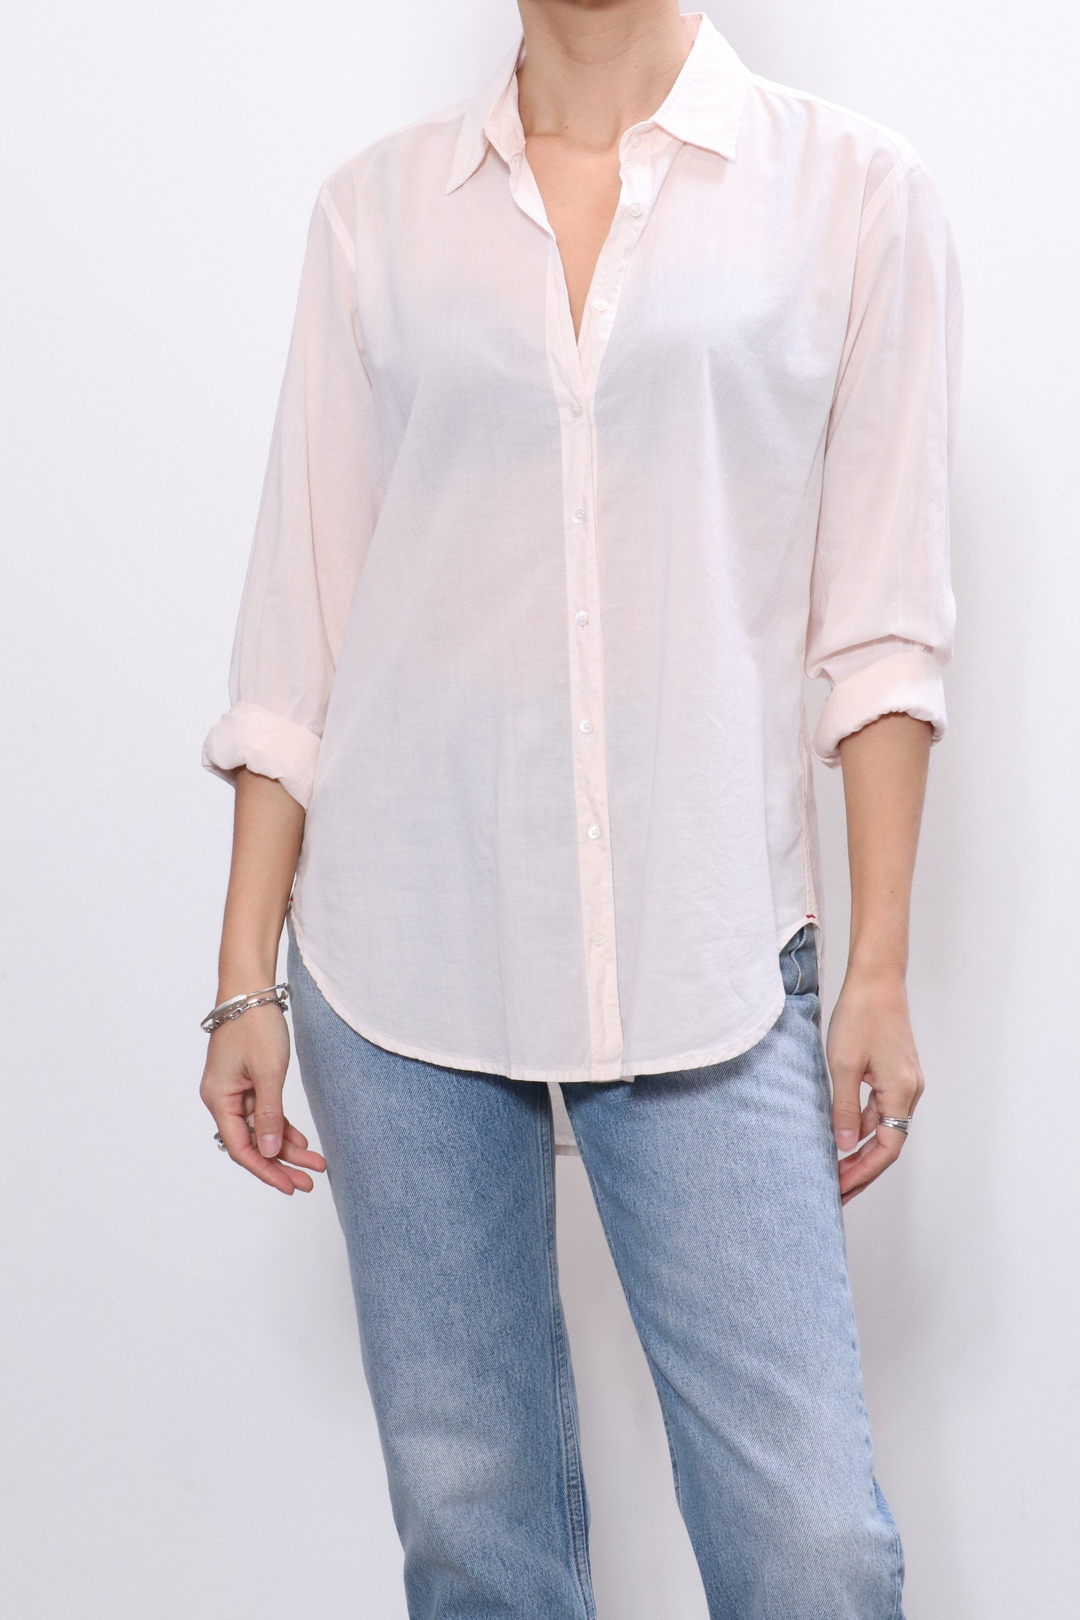 Beau Shirt - Pink Sand - Kingfisher Road - Online Boutique